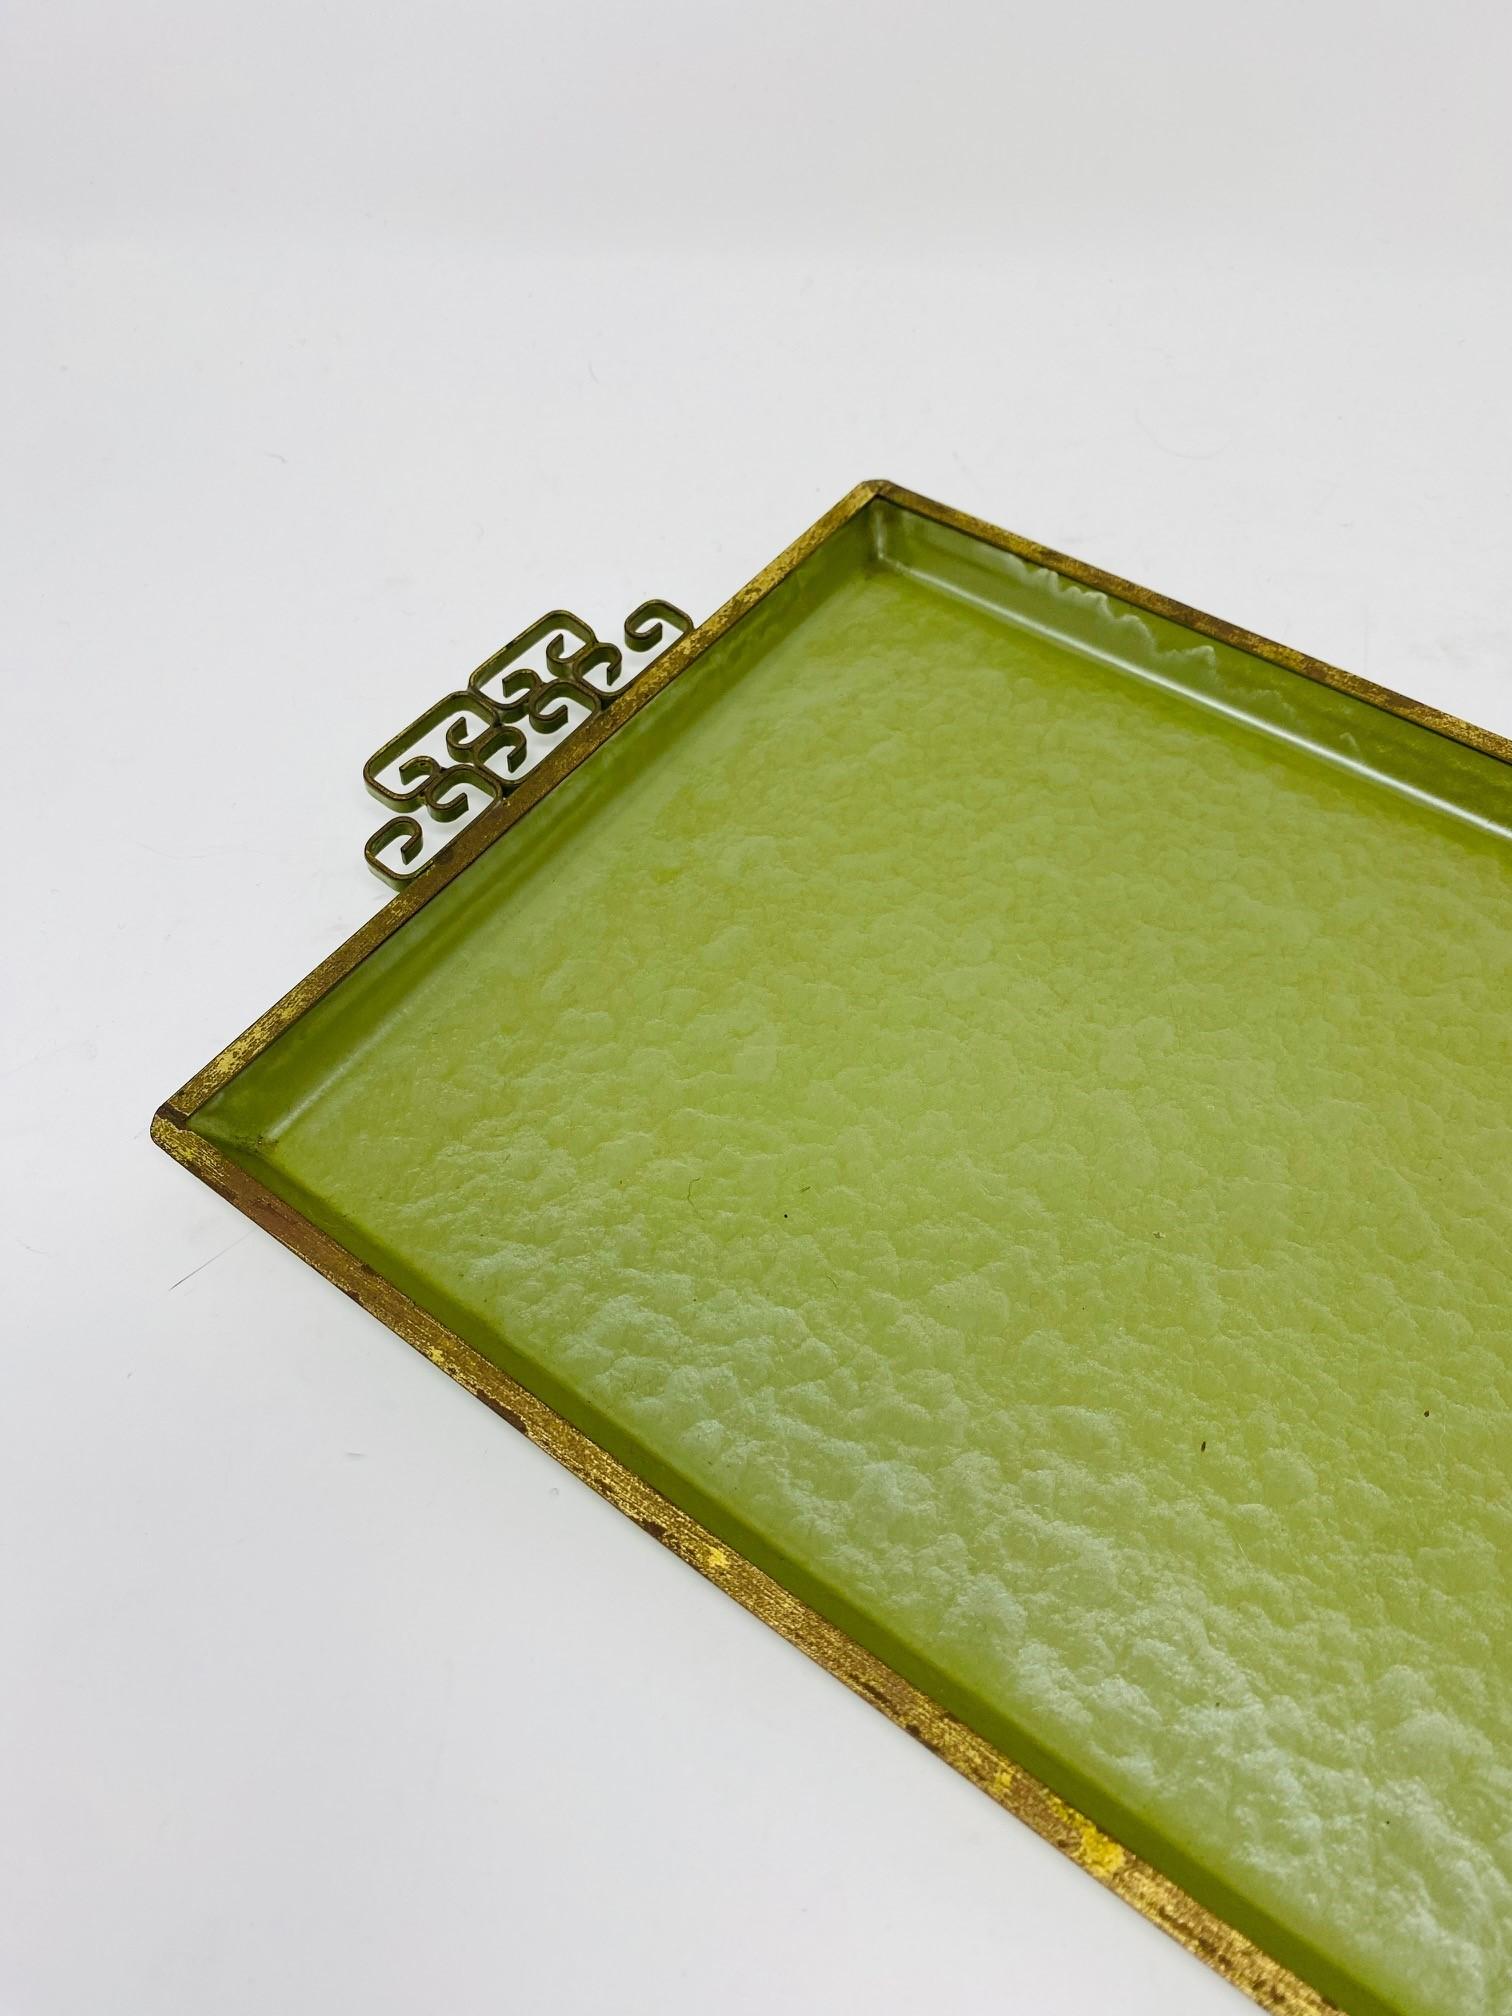 Hollywood Regency Vintage Mid Century Kyes Moire’ Glaze Brass and Enamel Green Tray 1960s For Sale